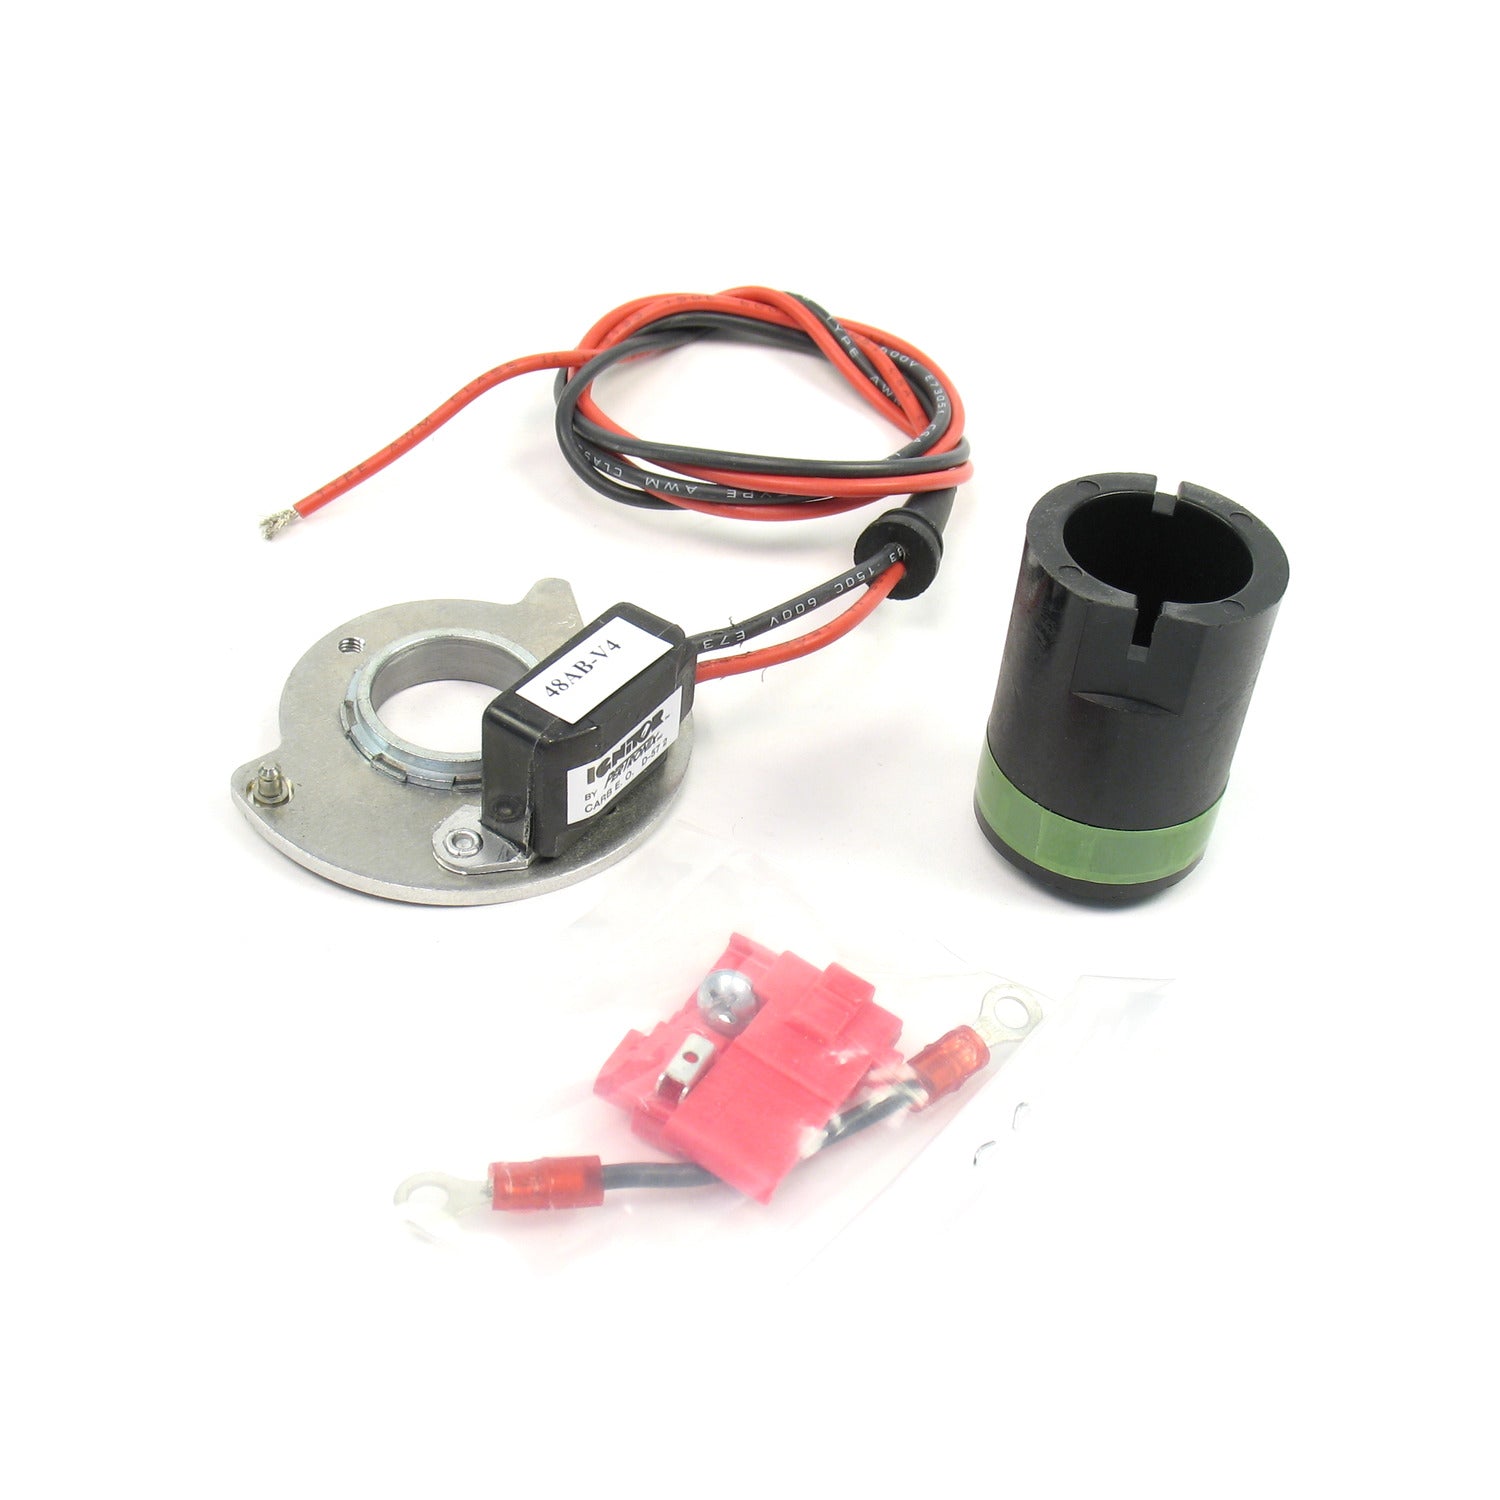 PerTronix FO-182 Ignitor® Ford Electronic Ignition Conversion Kit